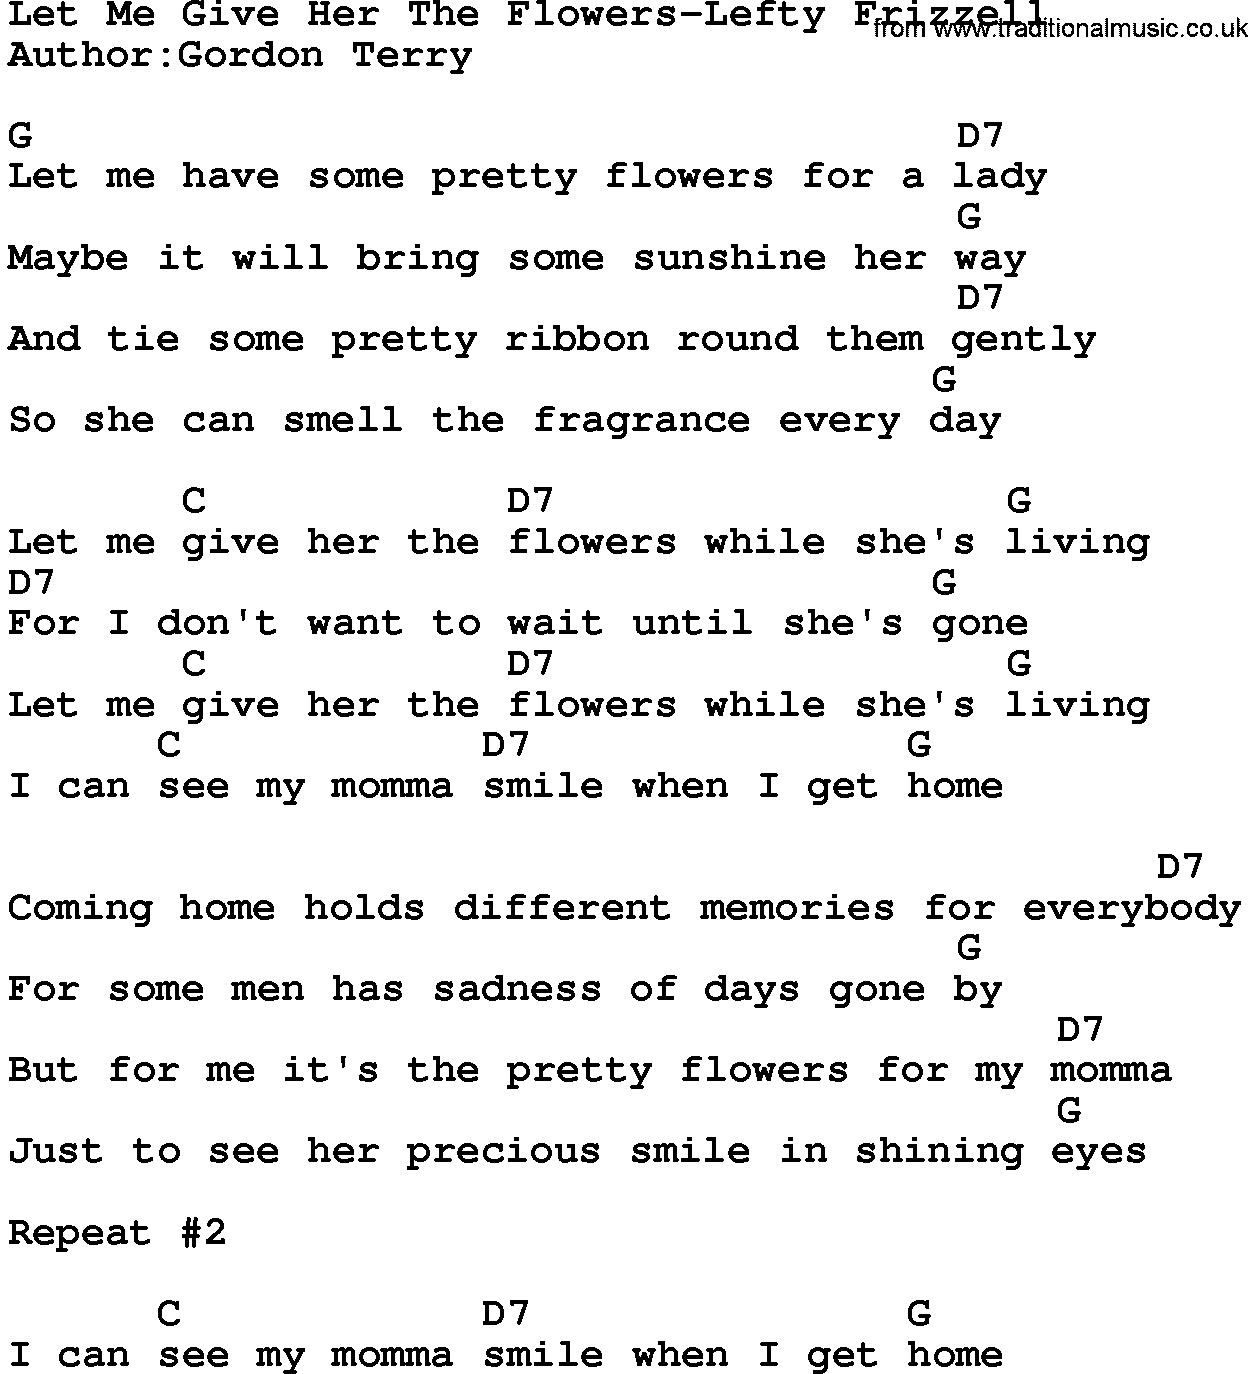 Country music song: Let Me Give Her The Flowers-Lefty Frizzell lyrics and chords